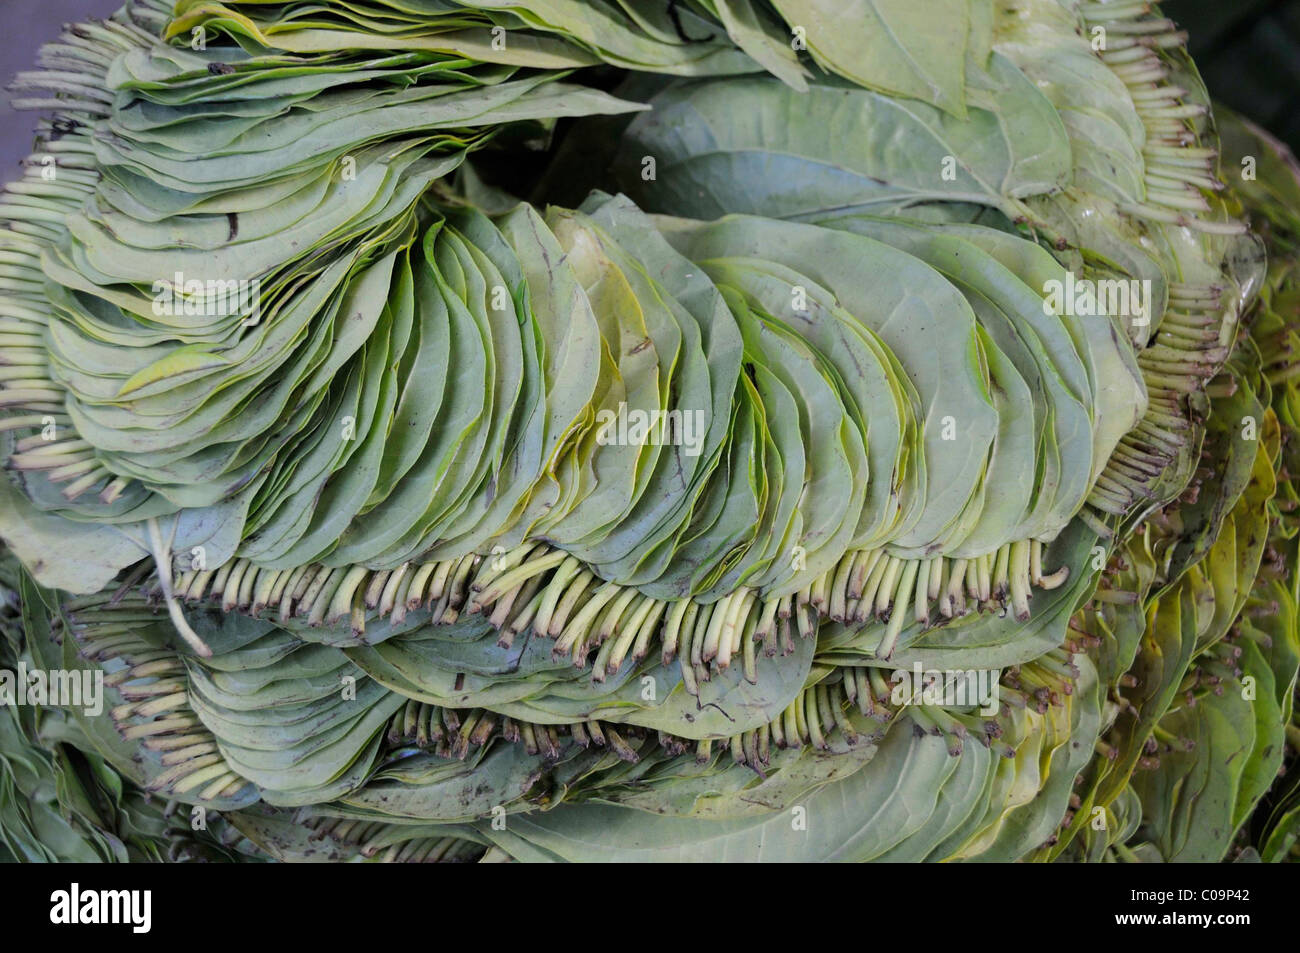 Background, Betel leaves (Piper betle) for chewing sold on the market, Pagan, Mandalay, Burma, Southeast Asia, Asia Stock Photo